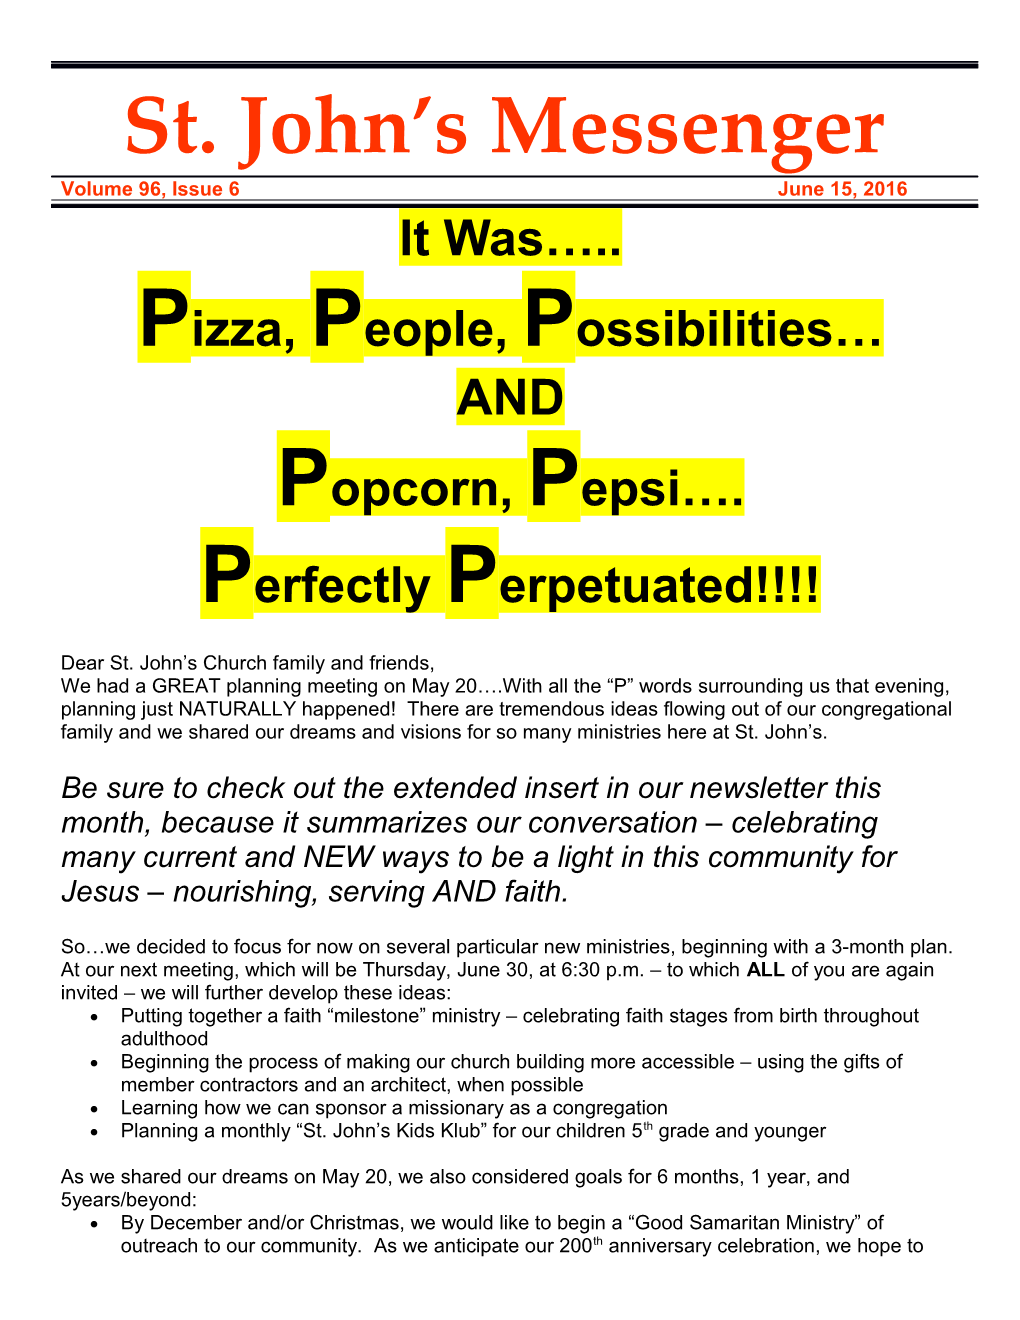 Pizza, People, Possibilities